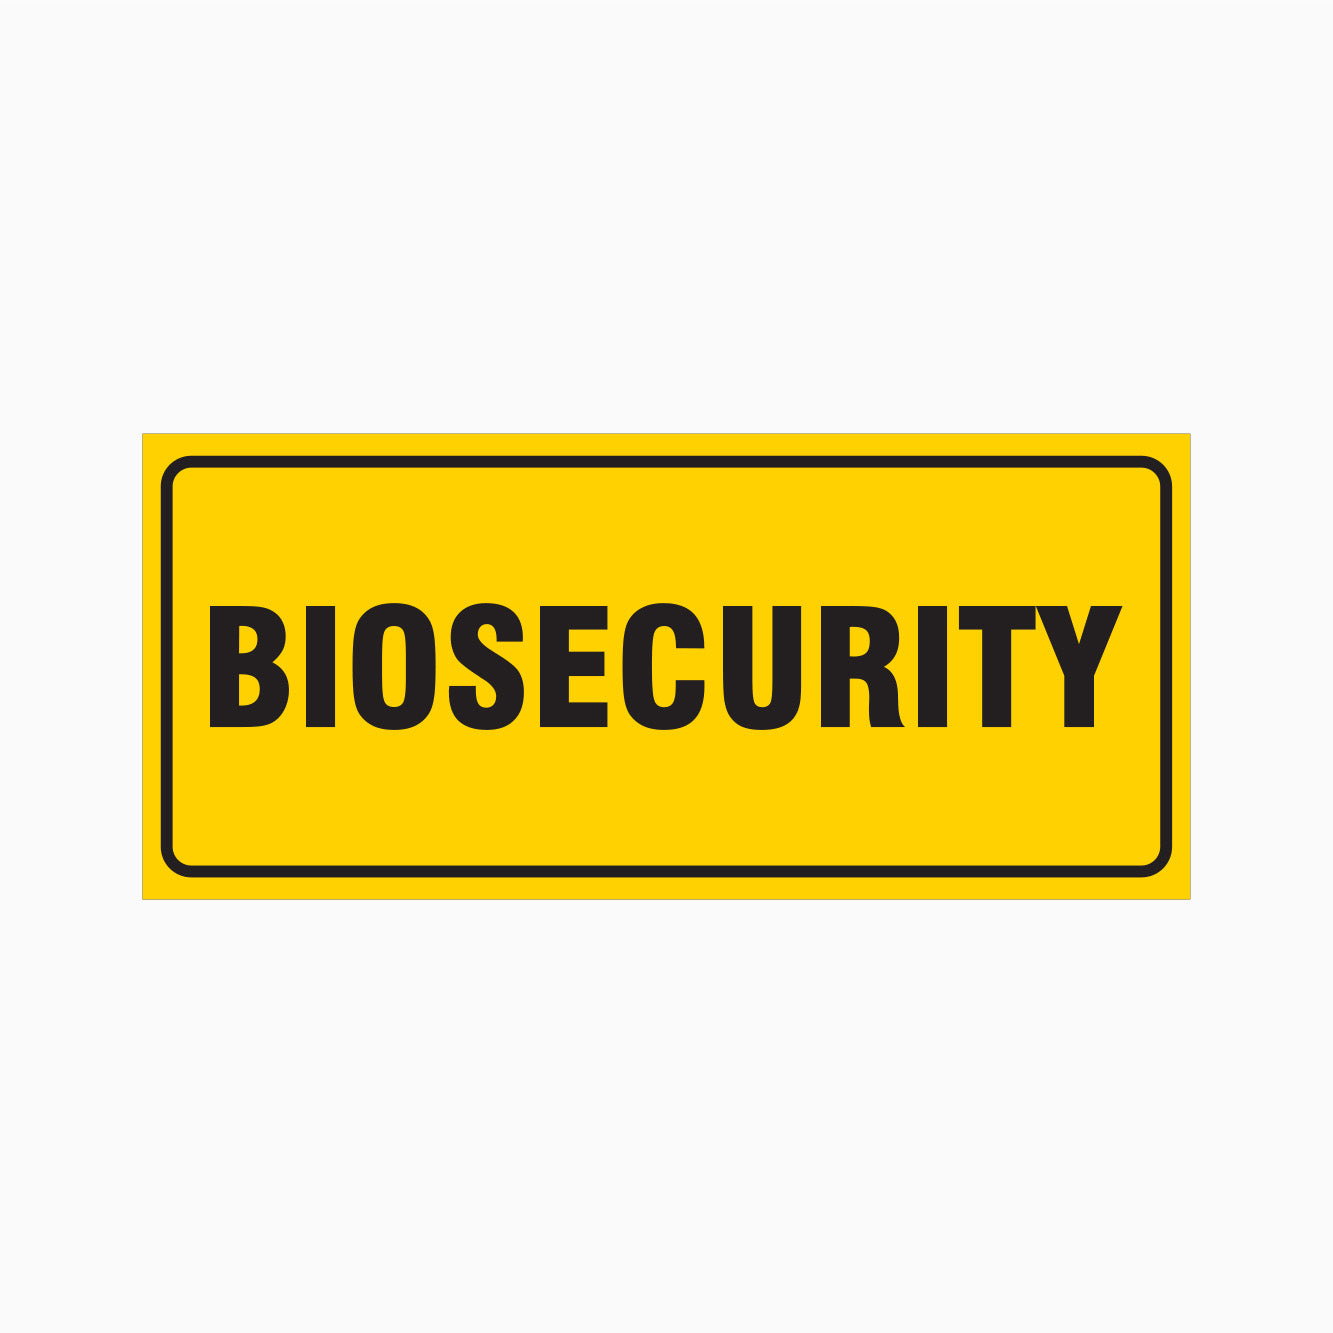 BIOSECURITY SIGN - caution signs